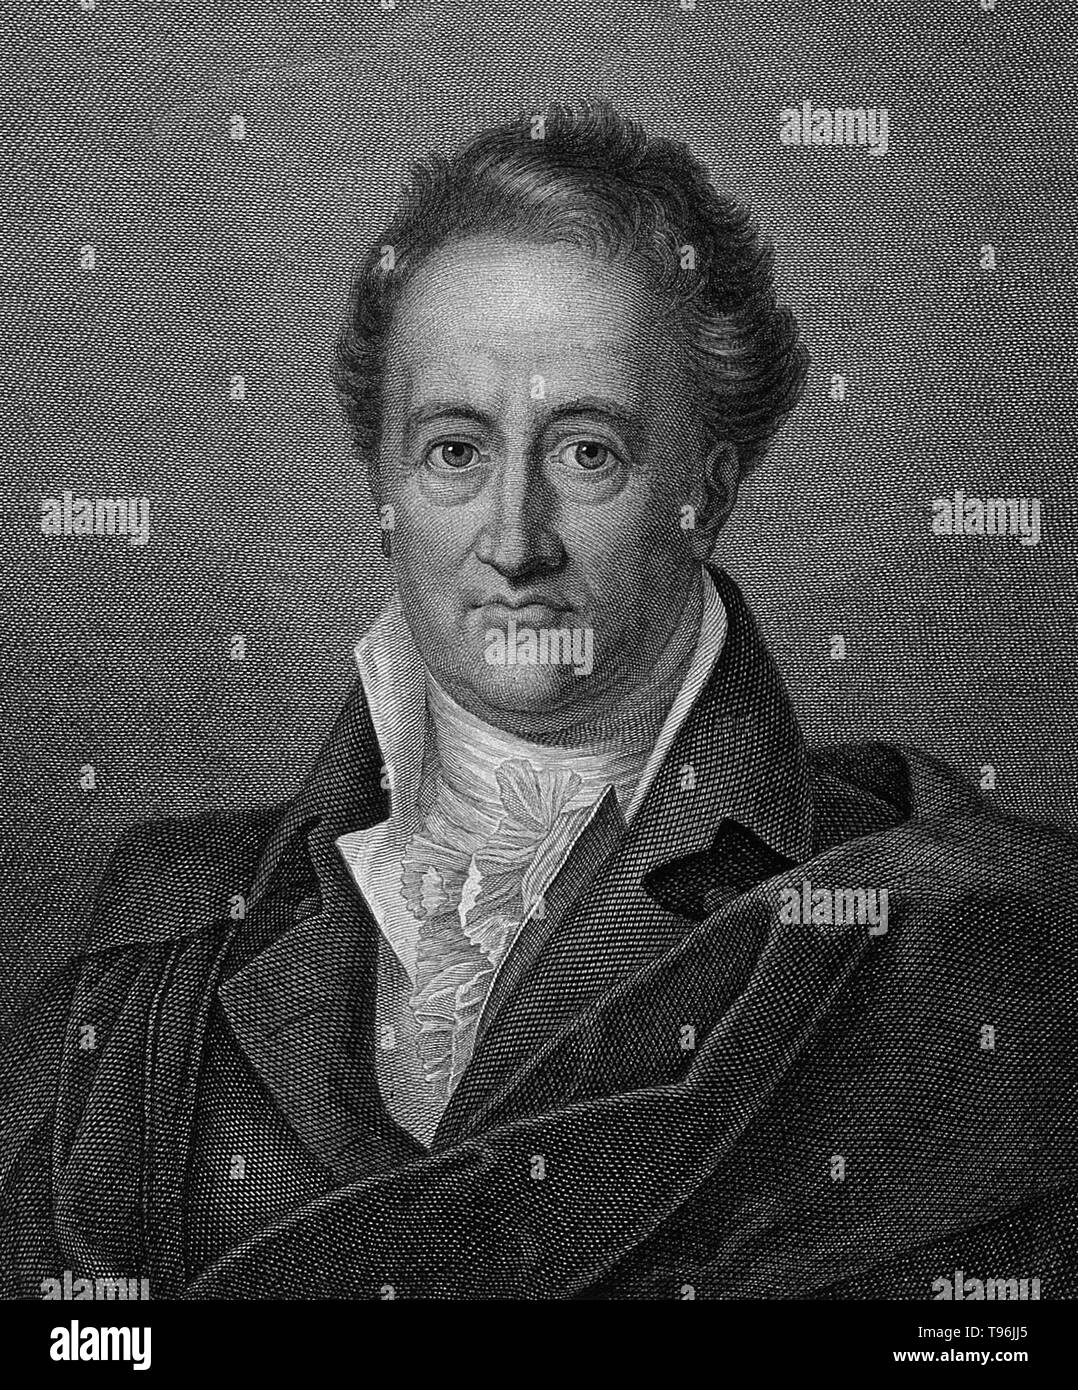 Johann Wolfgang von Goethe (August 28, 1749 - March 22, 1832) was a German writer, pictorial artist, biologist, statesman, theoretical physicist, and polymath. He is considered the supreme genius of modern German literature. His works span the fields of poetry, drama, prose, philosophy, and science. His Faust has been called one of the greatest dramatic works of modern European literature. Stock Photo